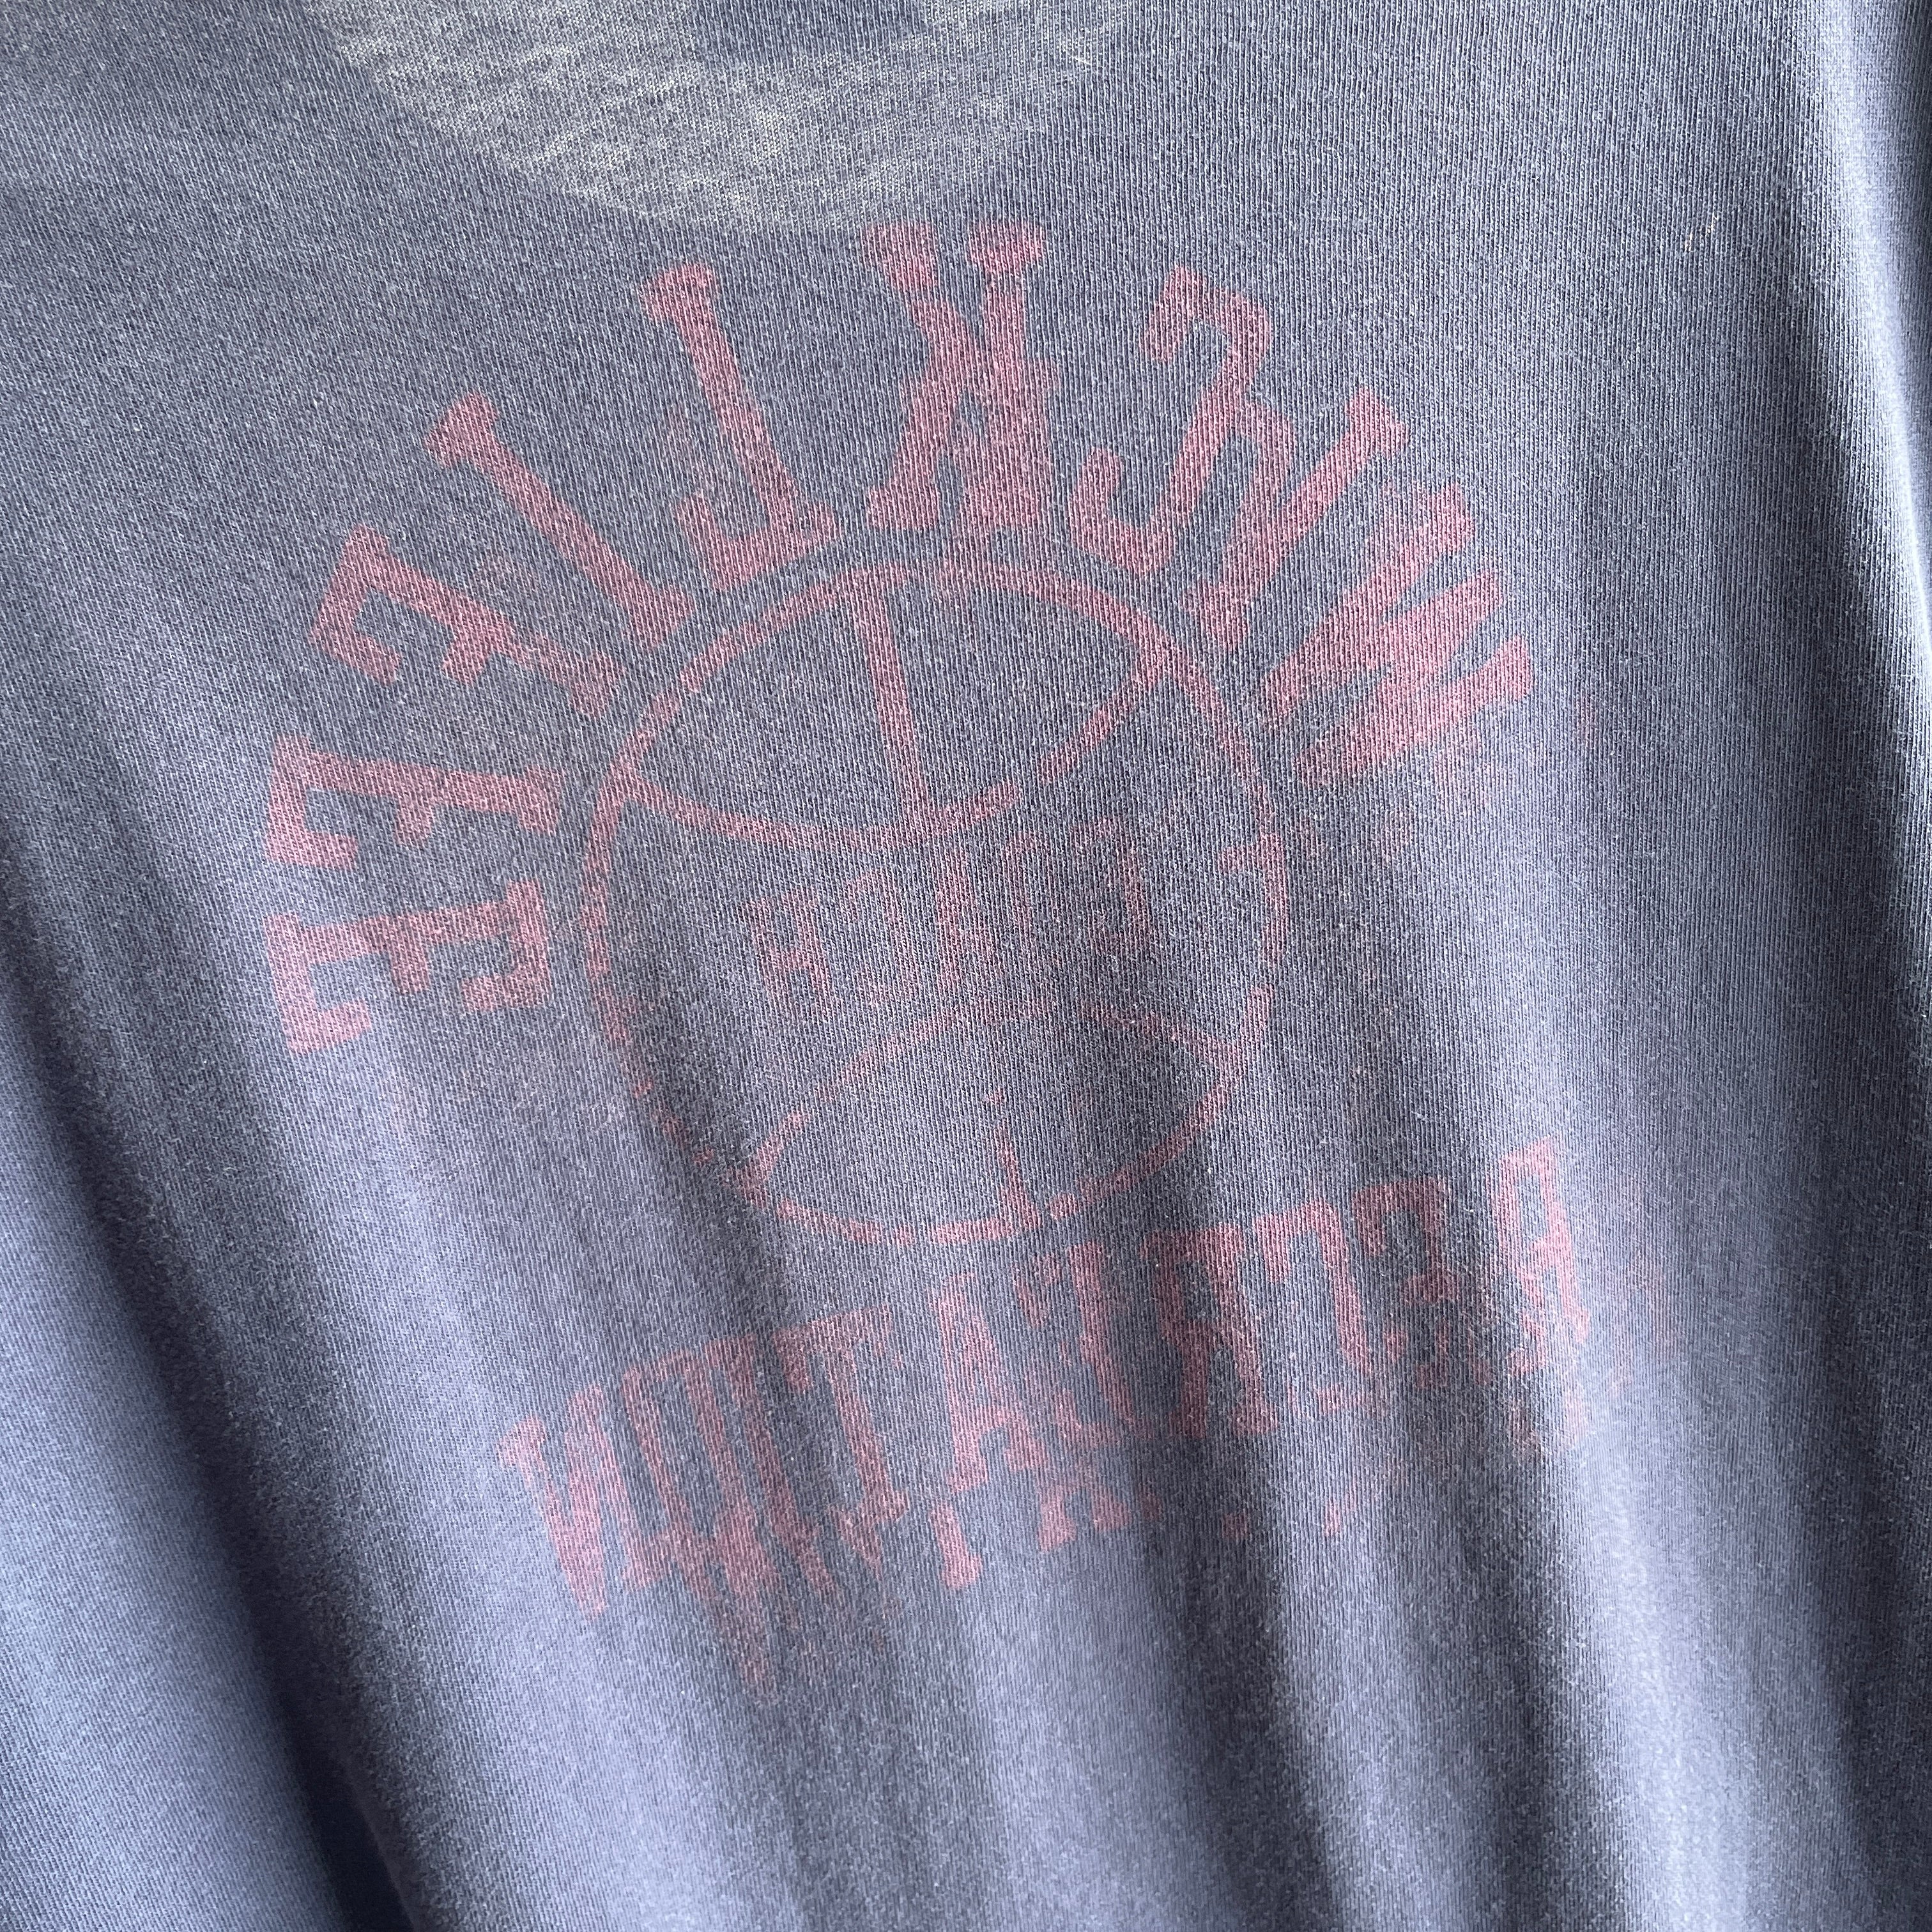 1980s Faded Navy Cotton T-Shirt with Some Graphic Fade on the Backside